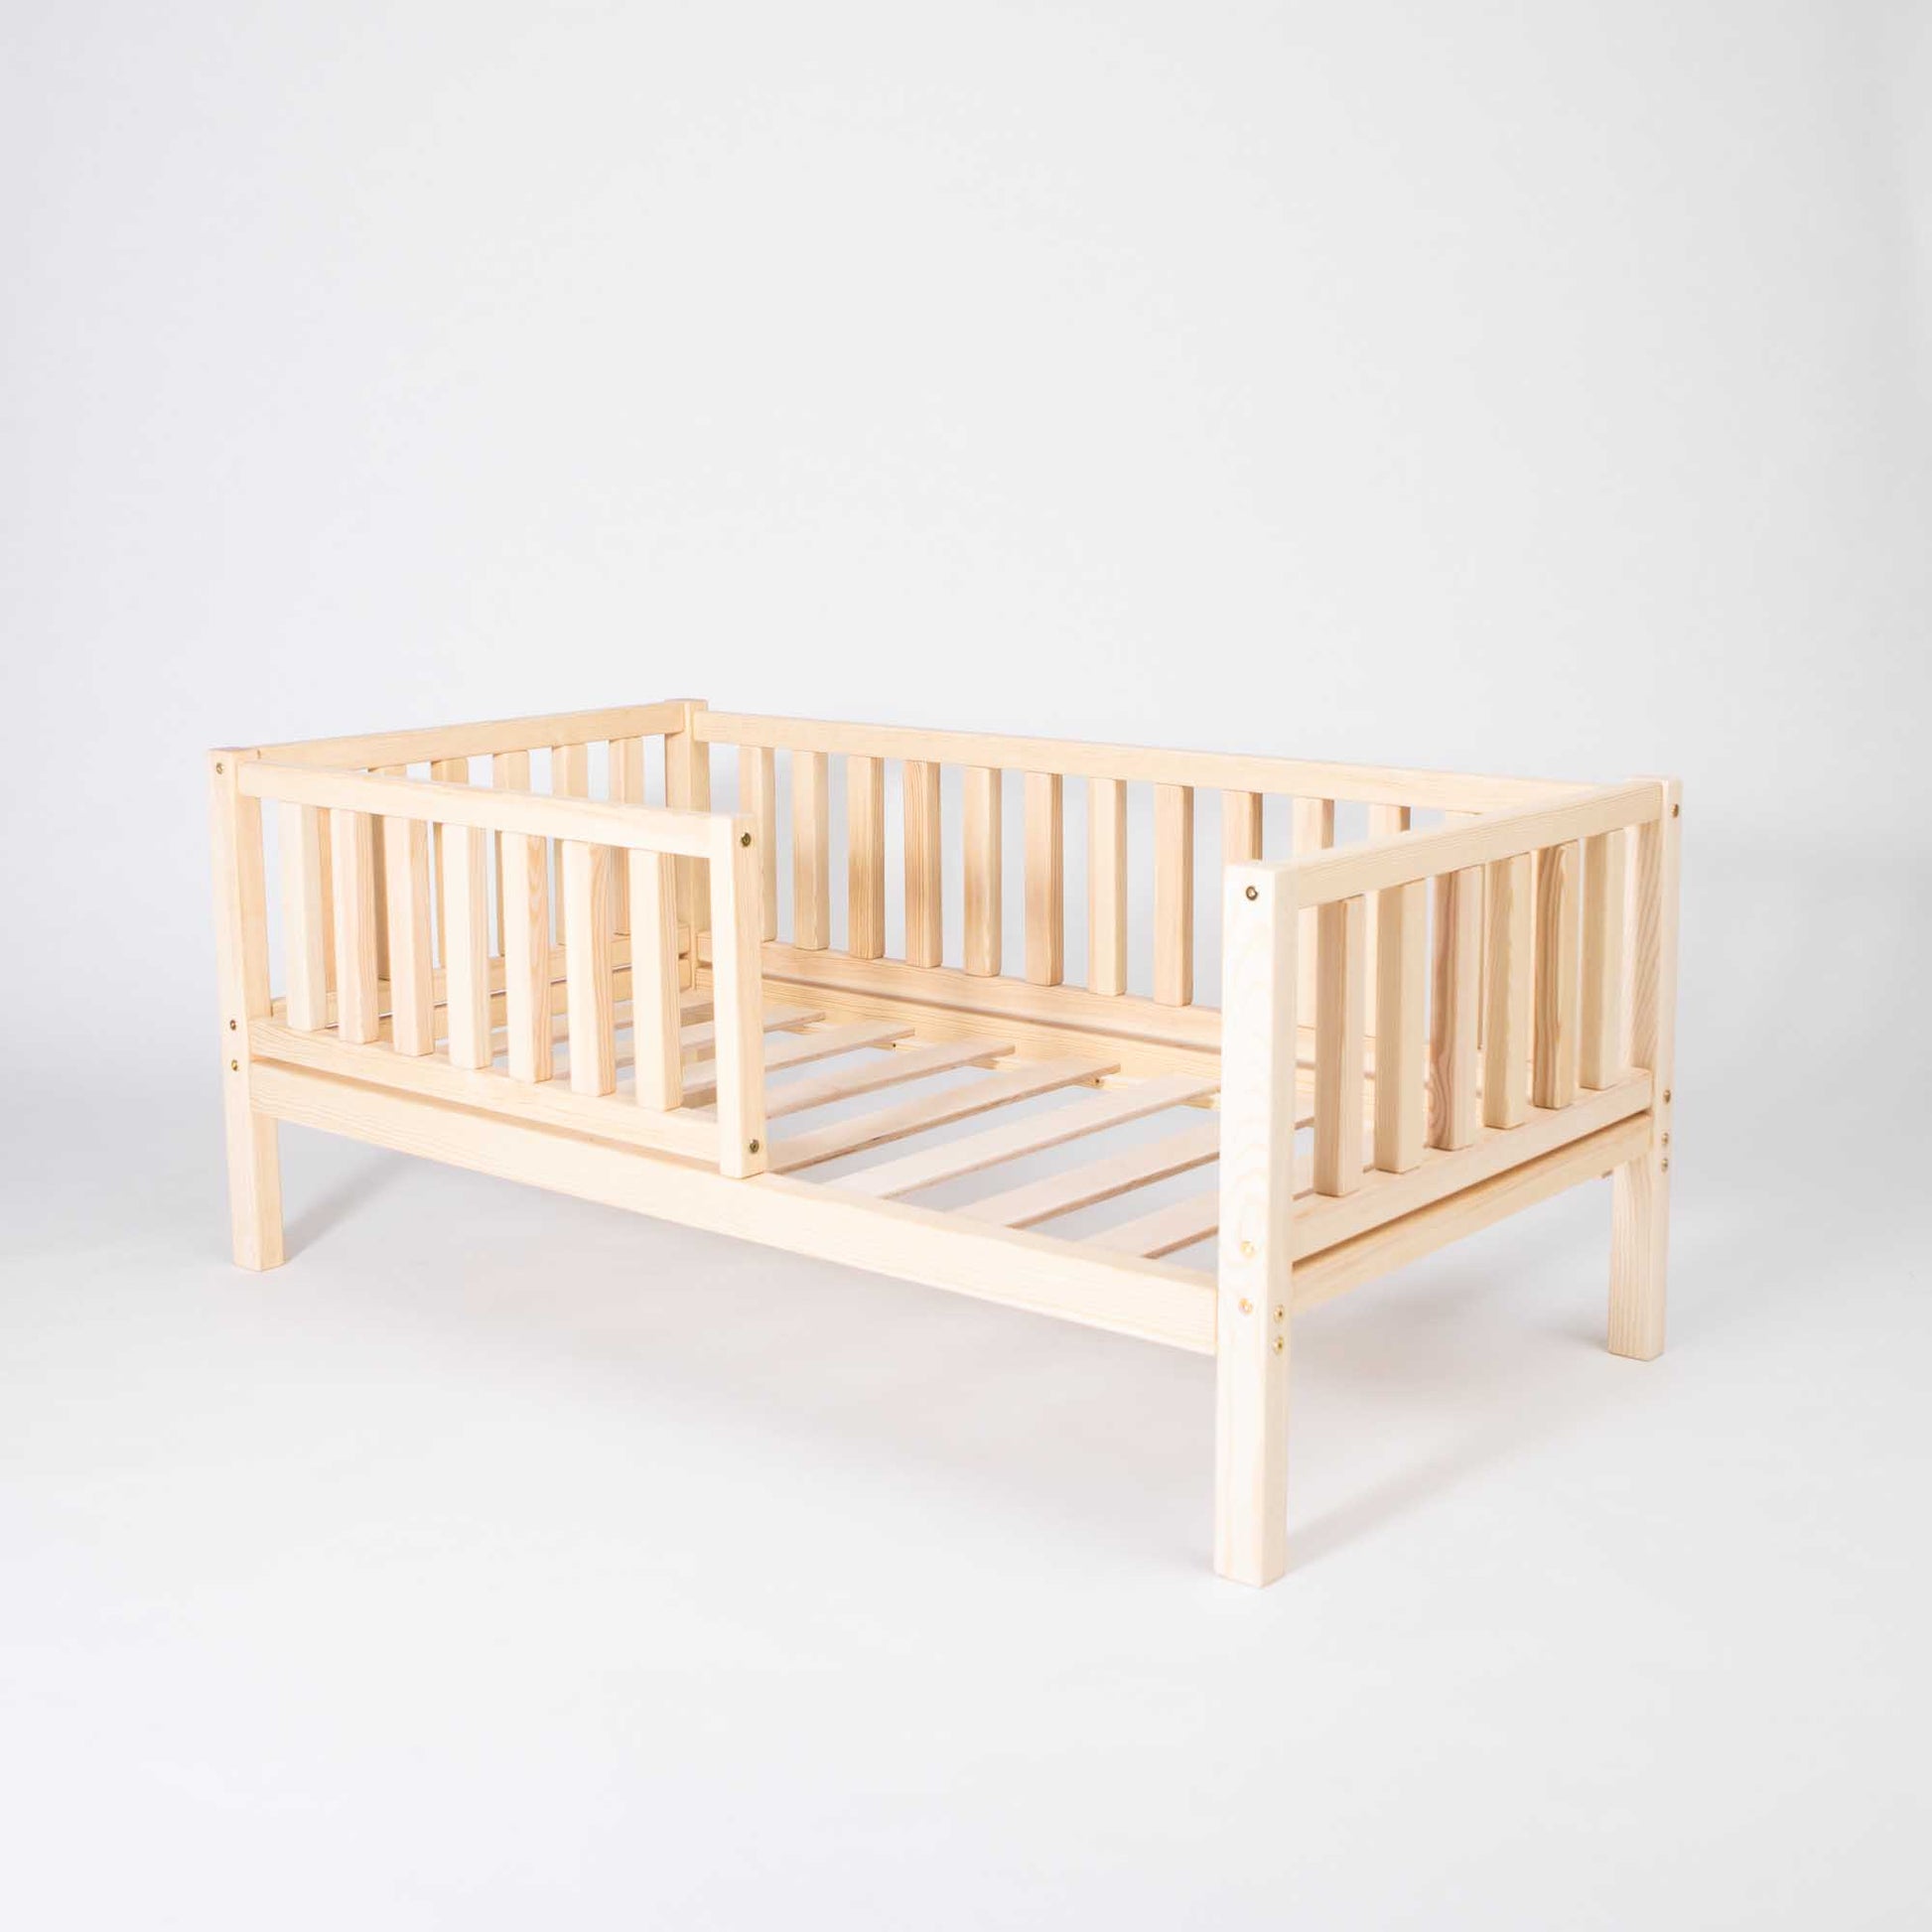 A long-lasting 2-in-1 toddler bed on legs with a vertical rail fence by Sweet Home From Wood.